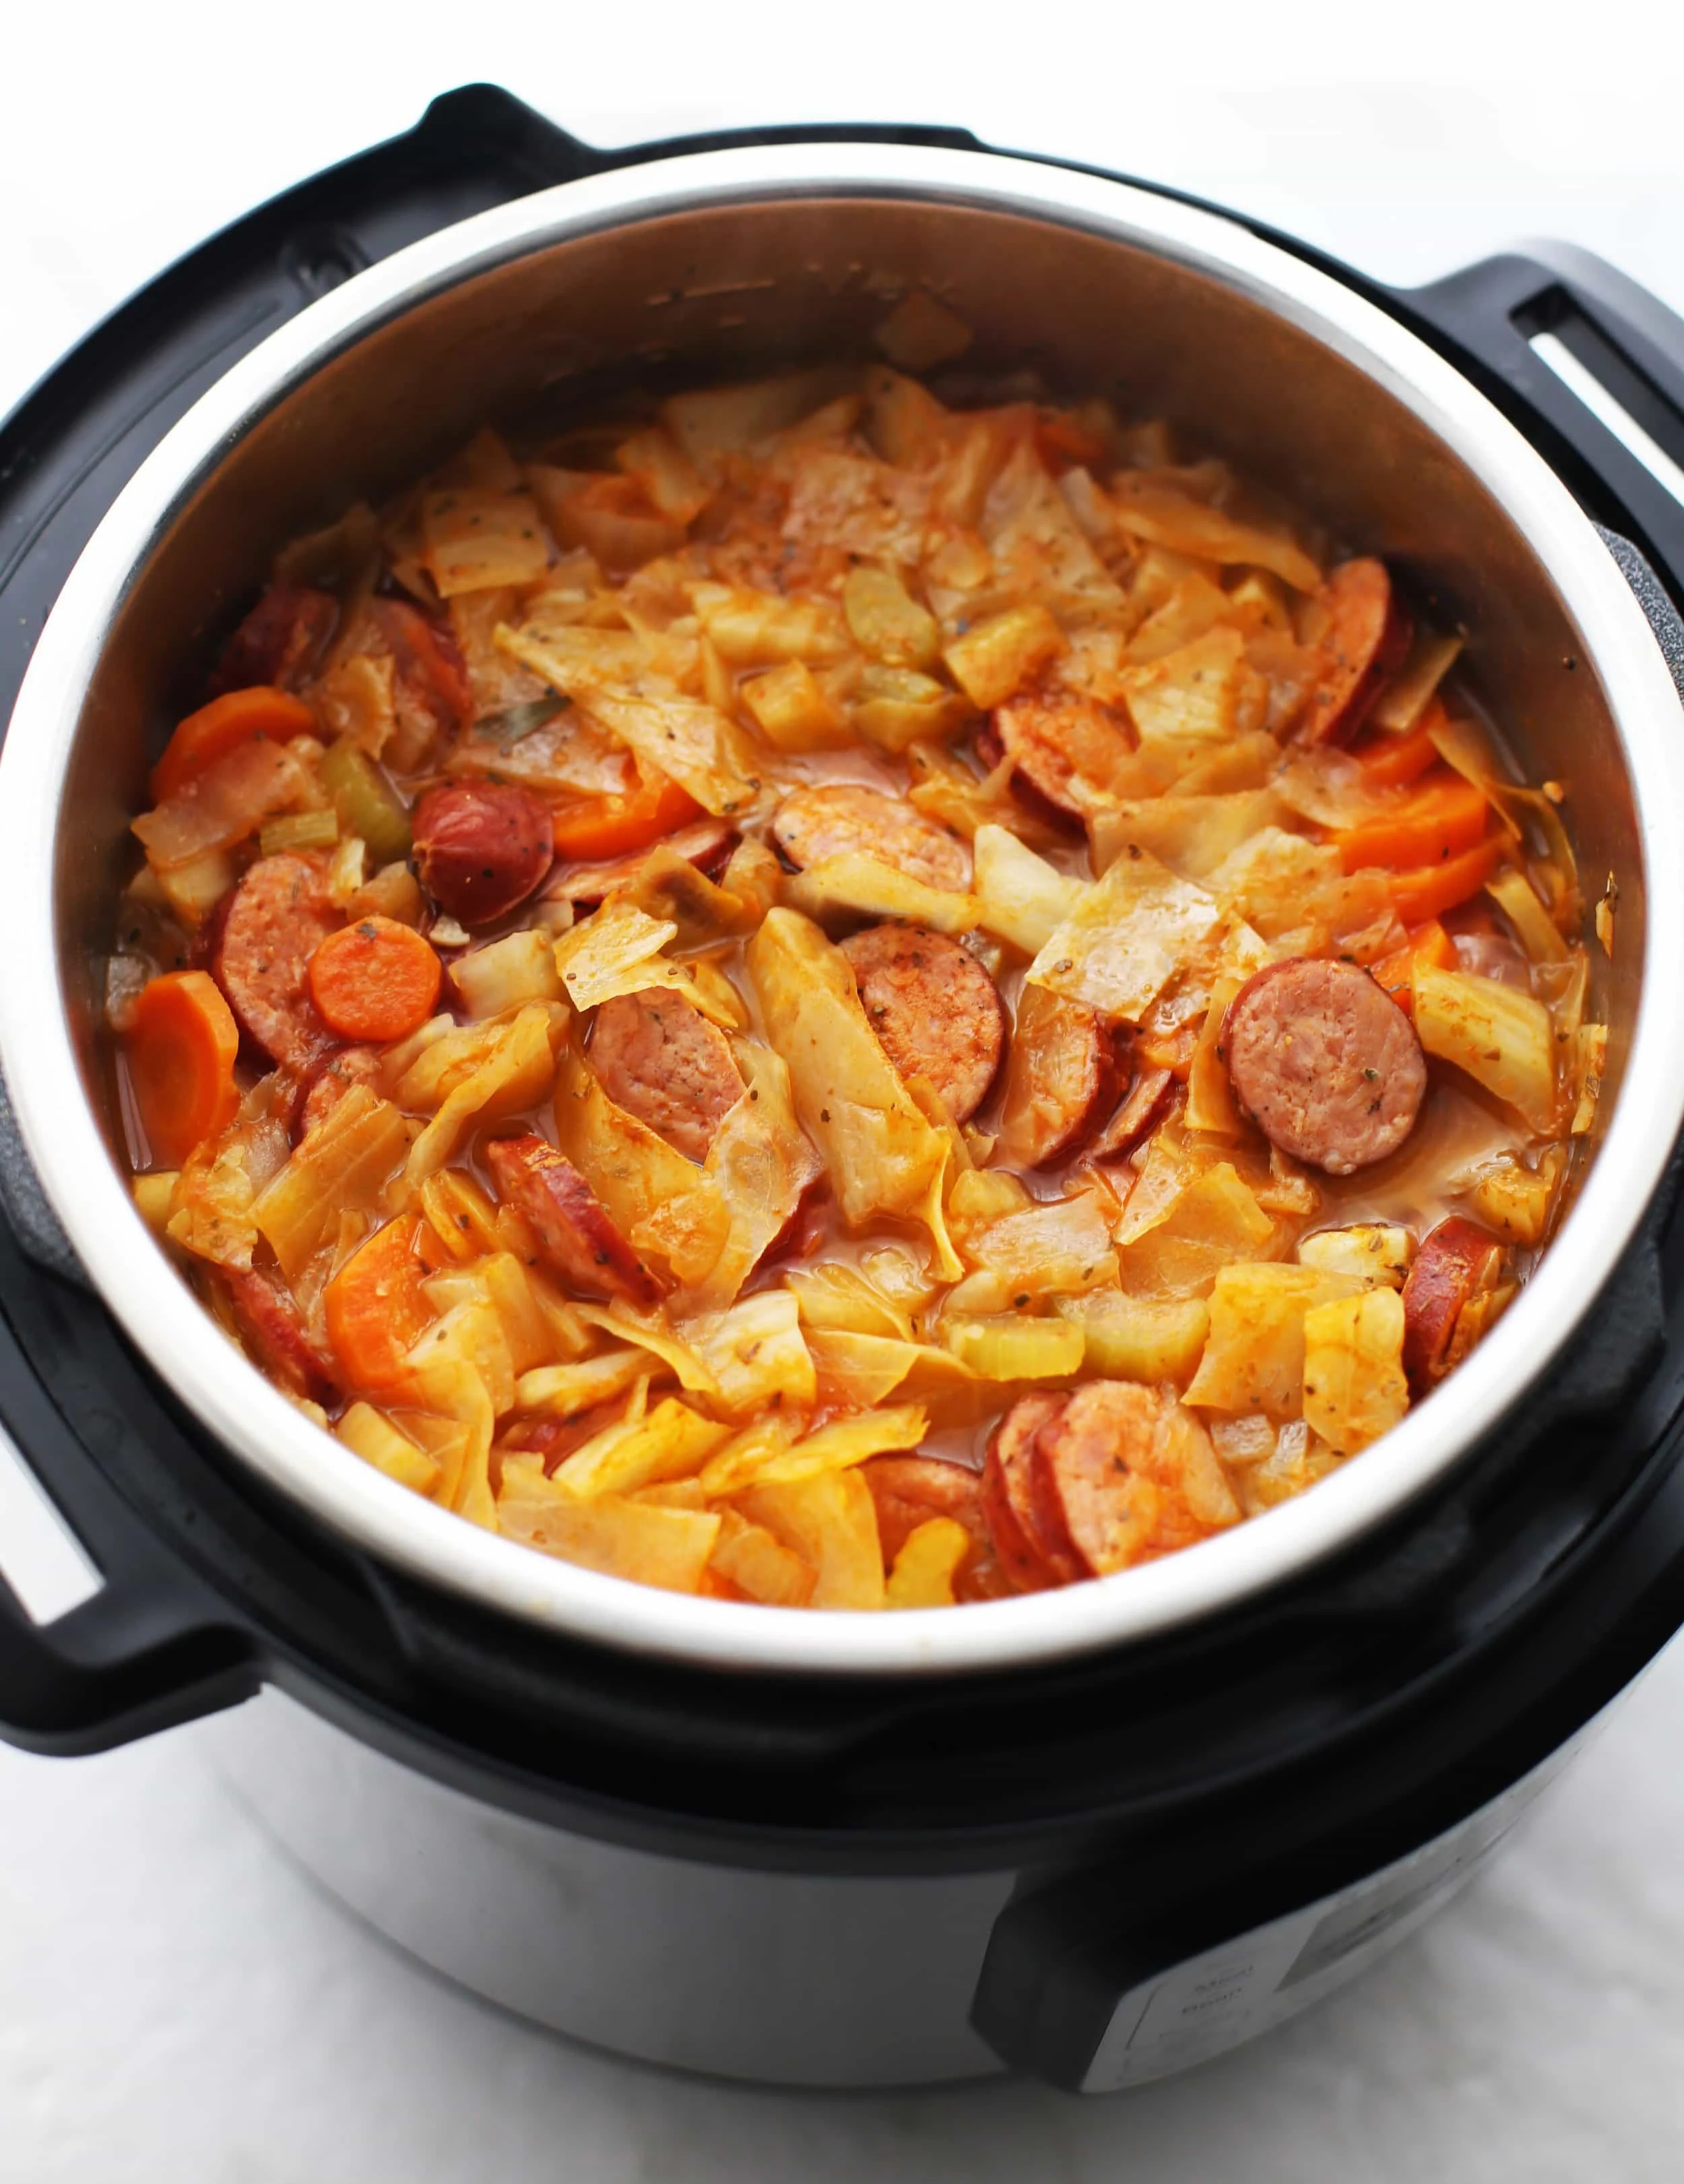 Hearty fennel, cabbage, and sausage soup in an Instant Pot.